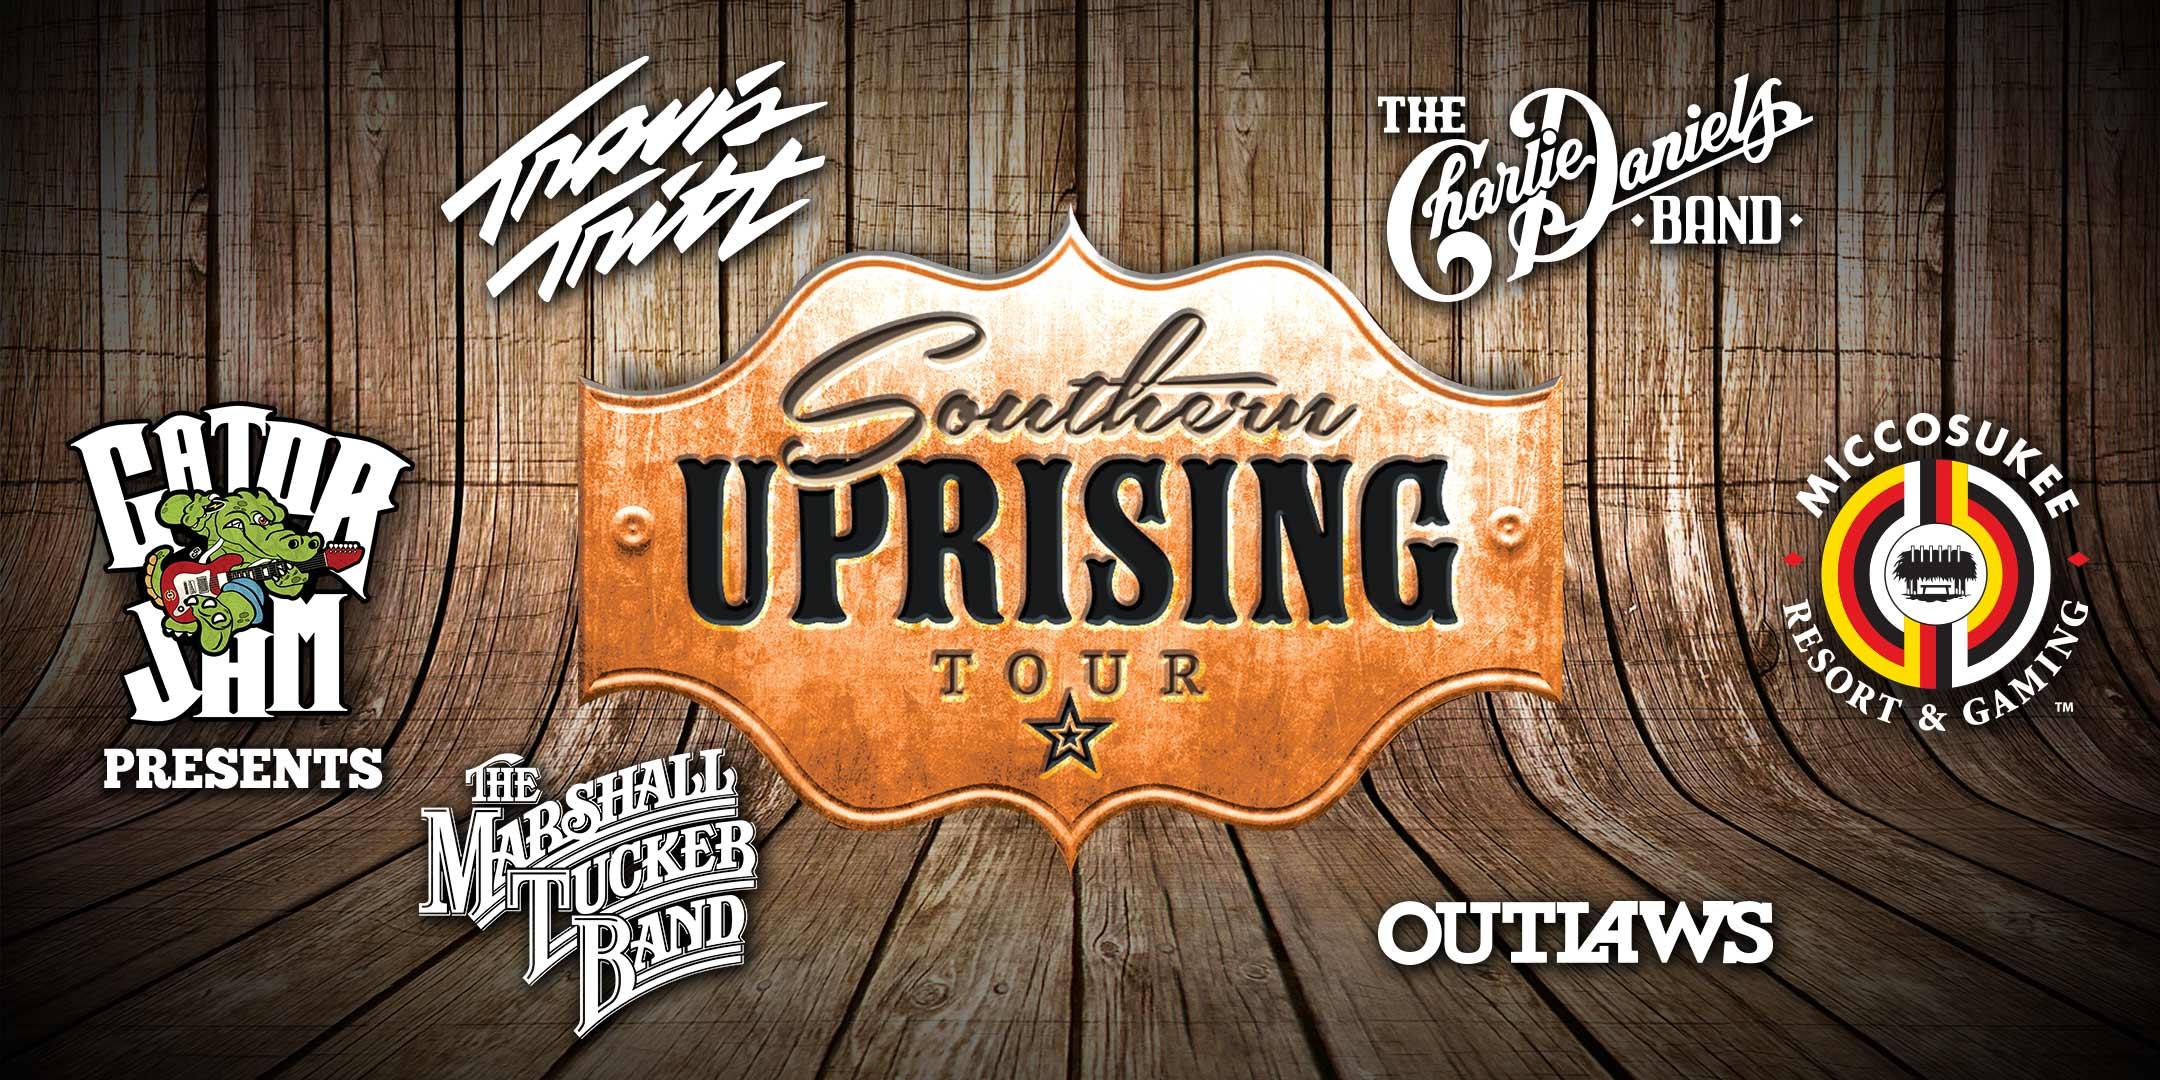 Southern Uprising Tour & Krome BBQ Cook-off